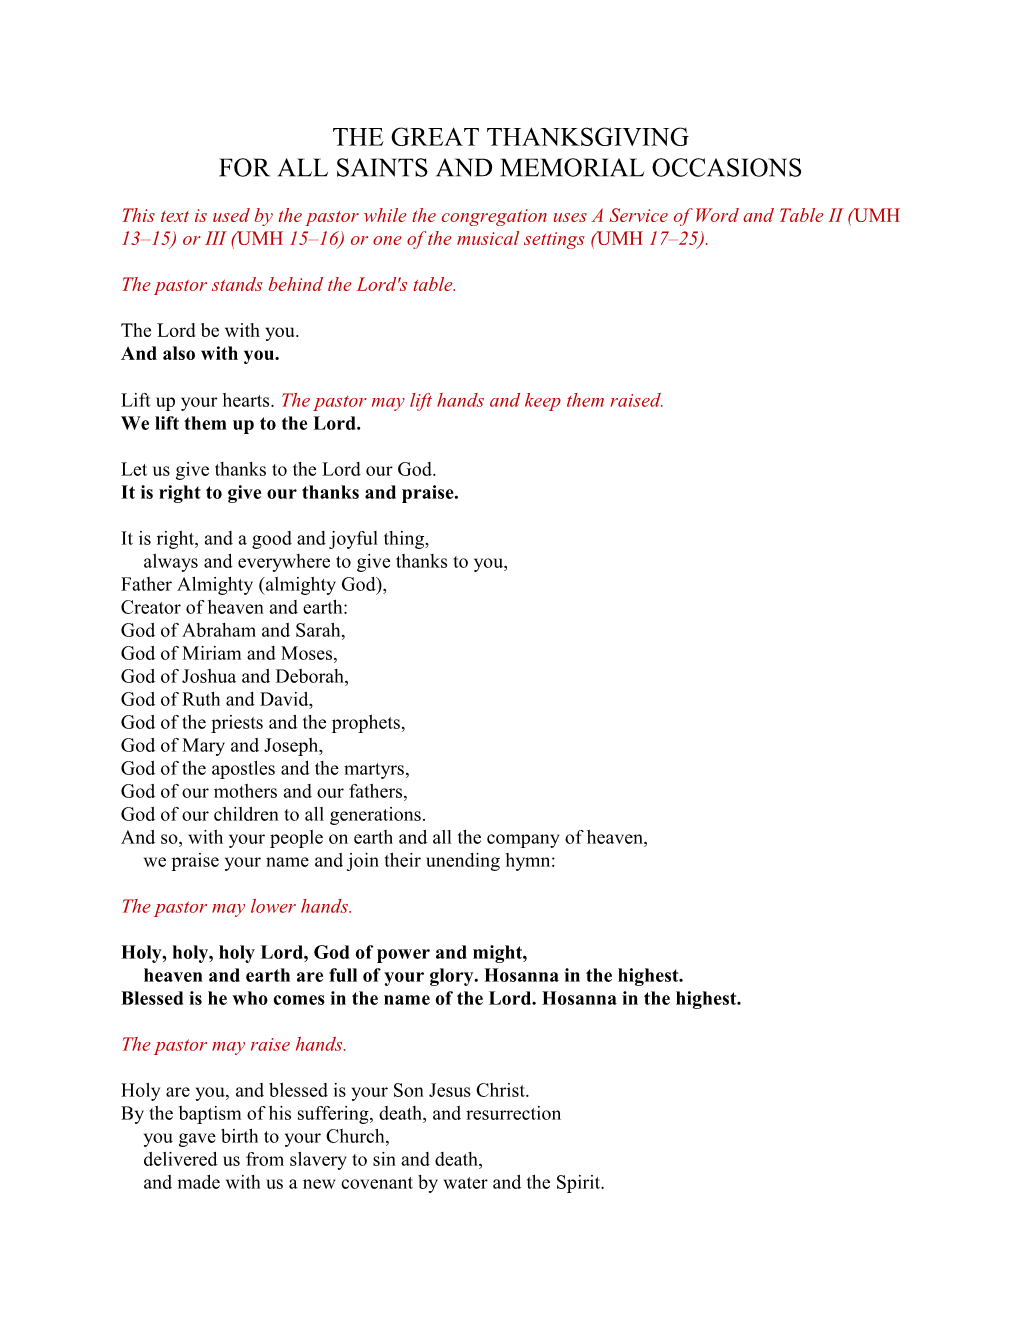 For All Saints and Memorial Occasions